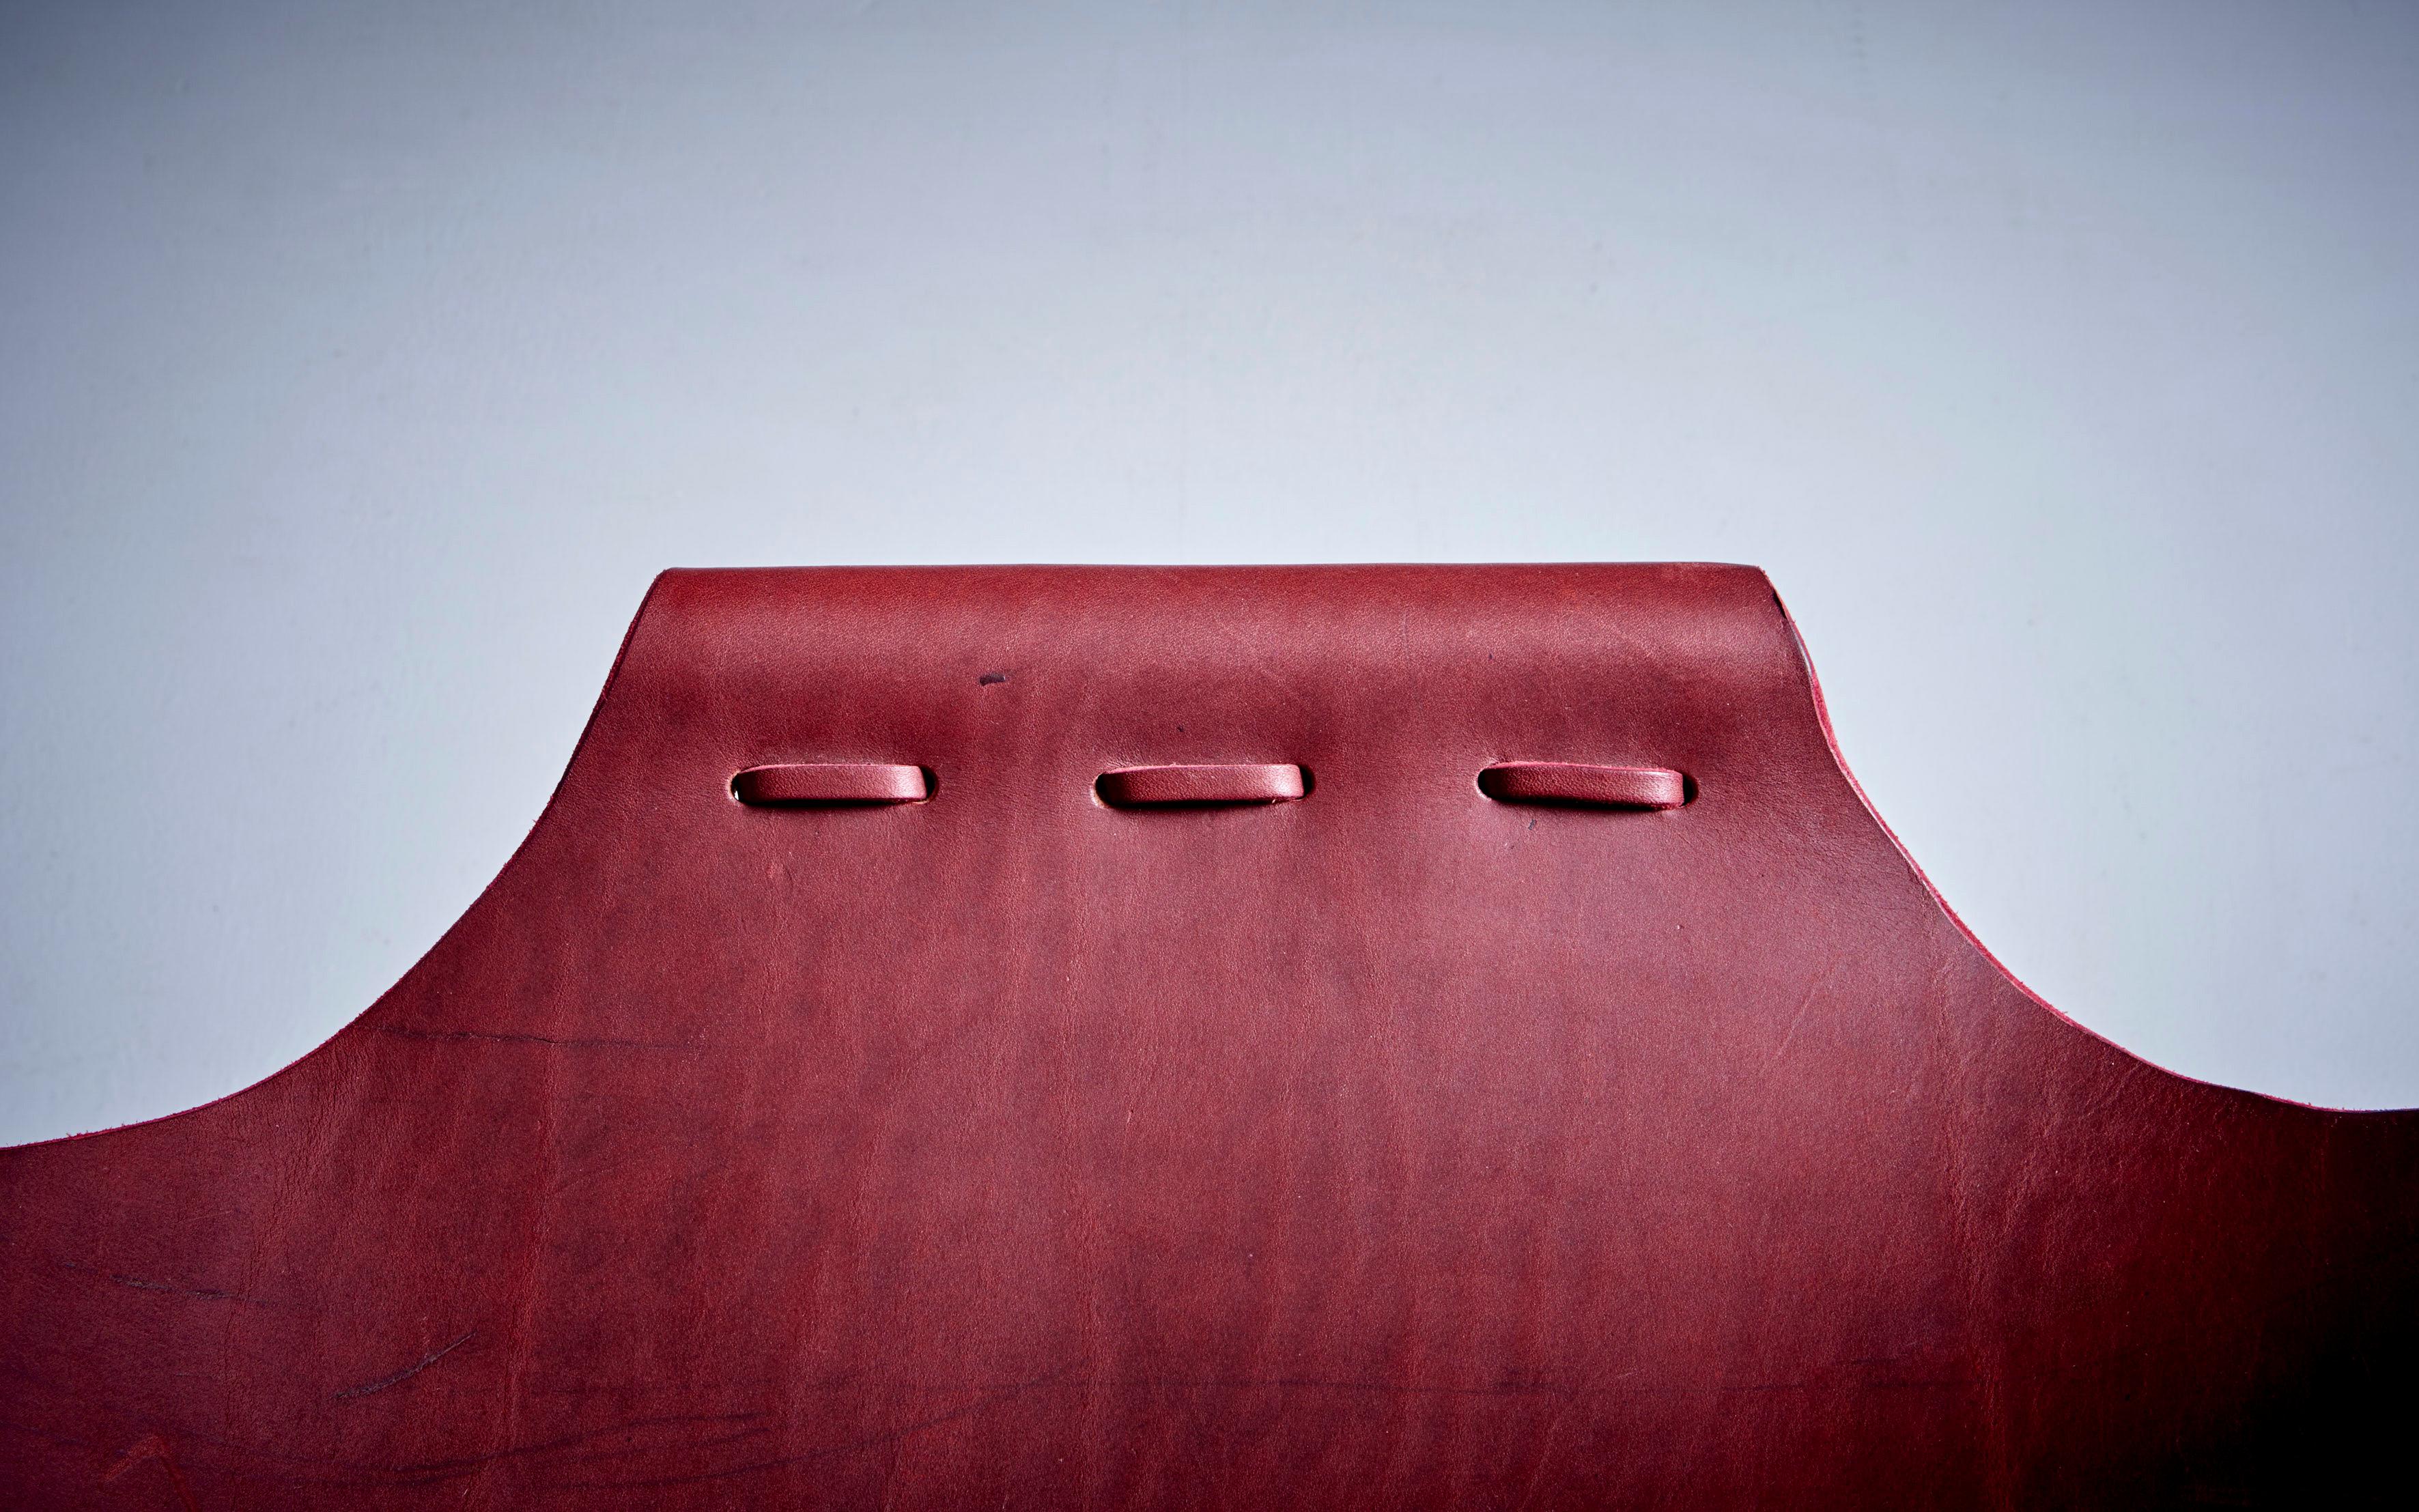 A unique chair for reading and lounging. Rest your back against one side and your legs against the opposite side. Latigo leather and powder-coated steel frame. The leather can be chosen in black, cognac, red and dark brown. Frame is lacquered in